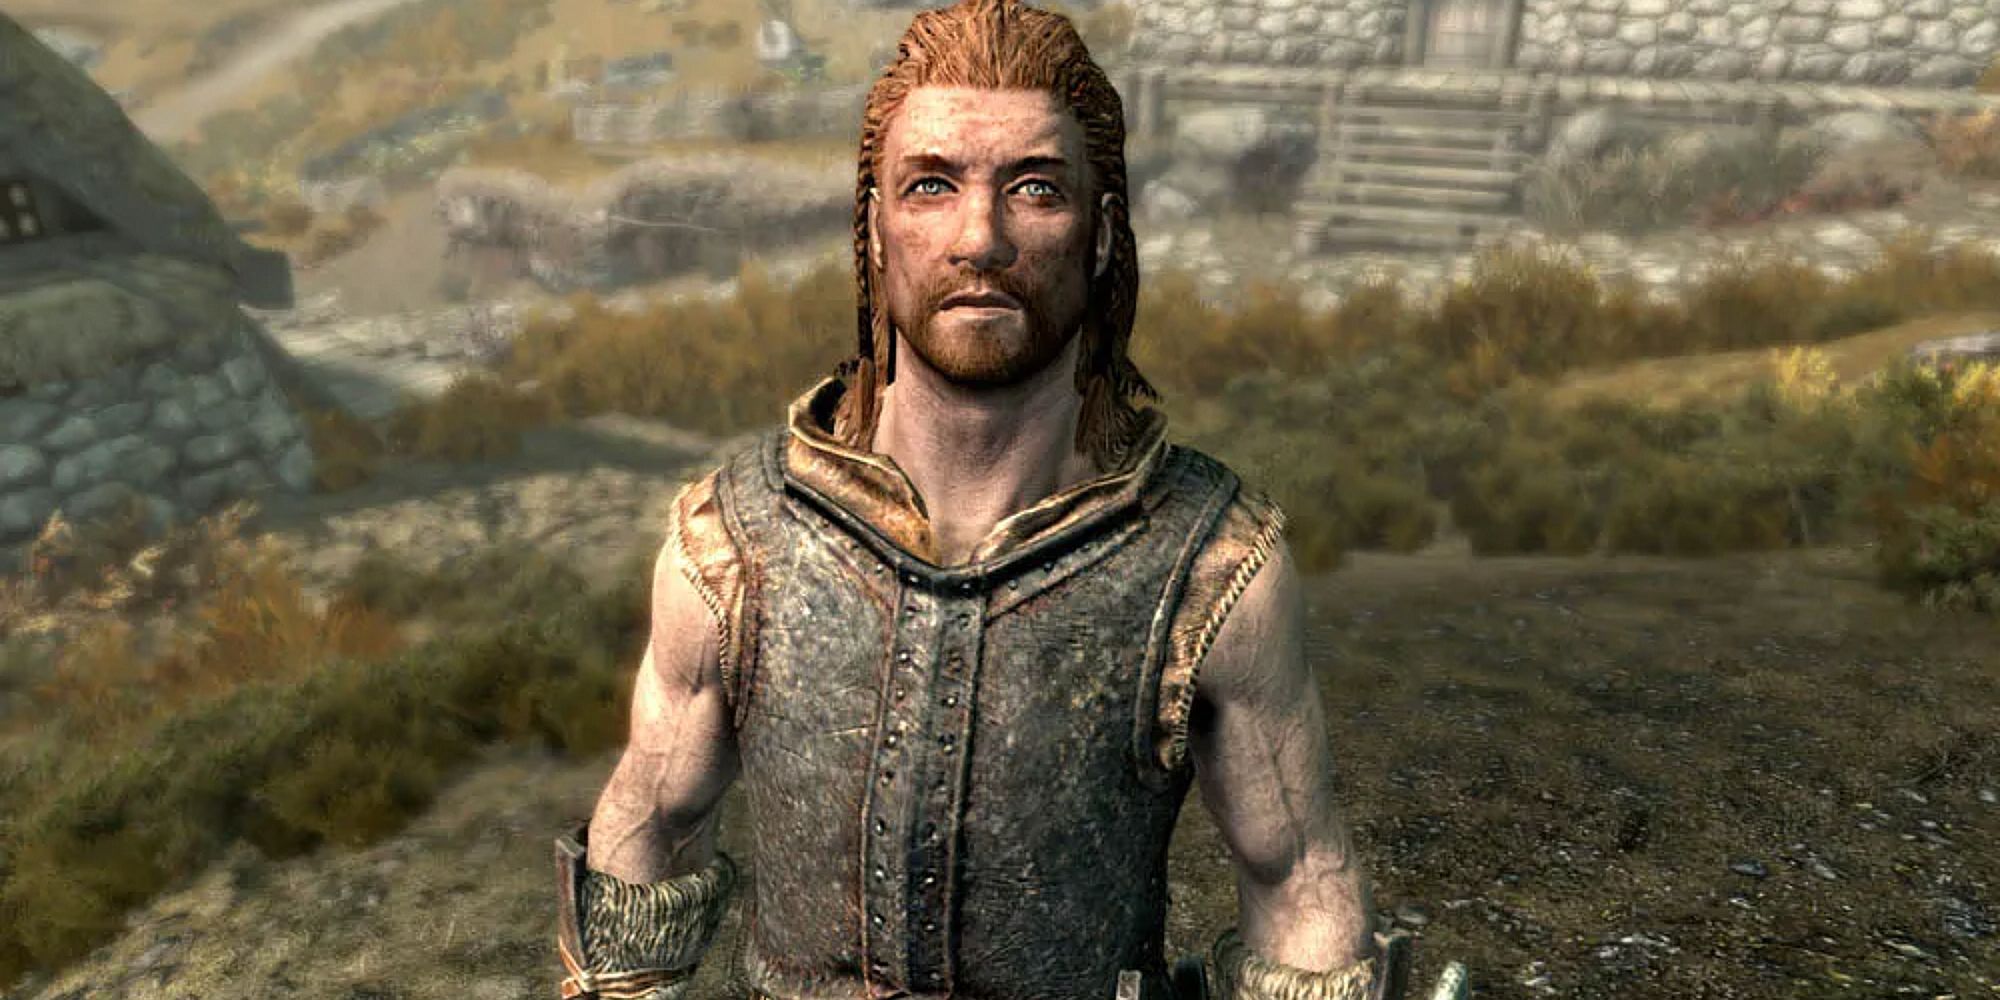 Erik the Slayer of Skyrim stands looking at the camera